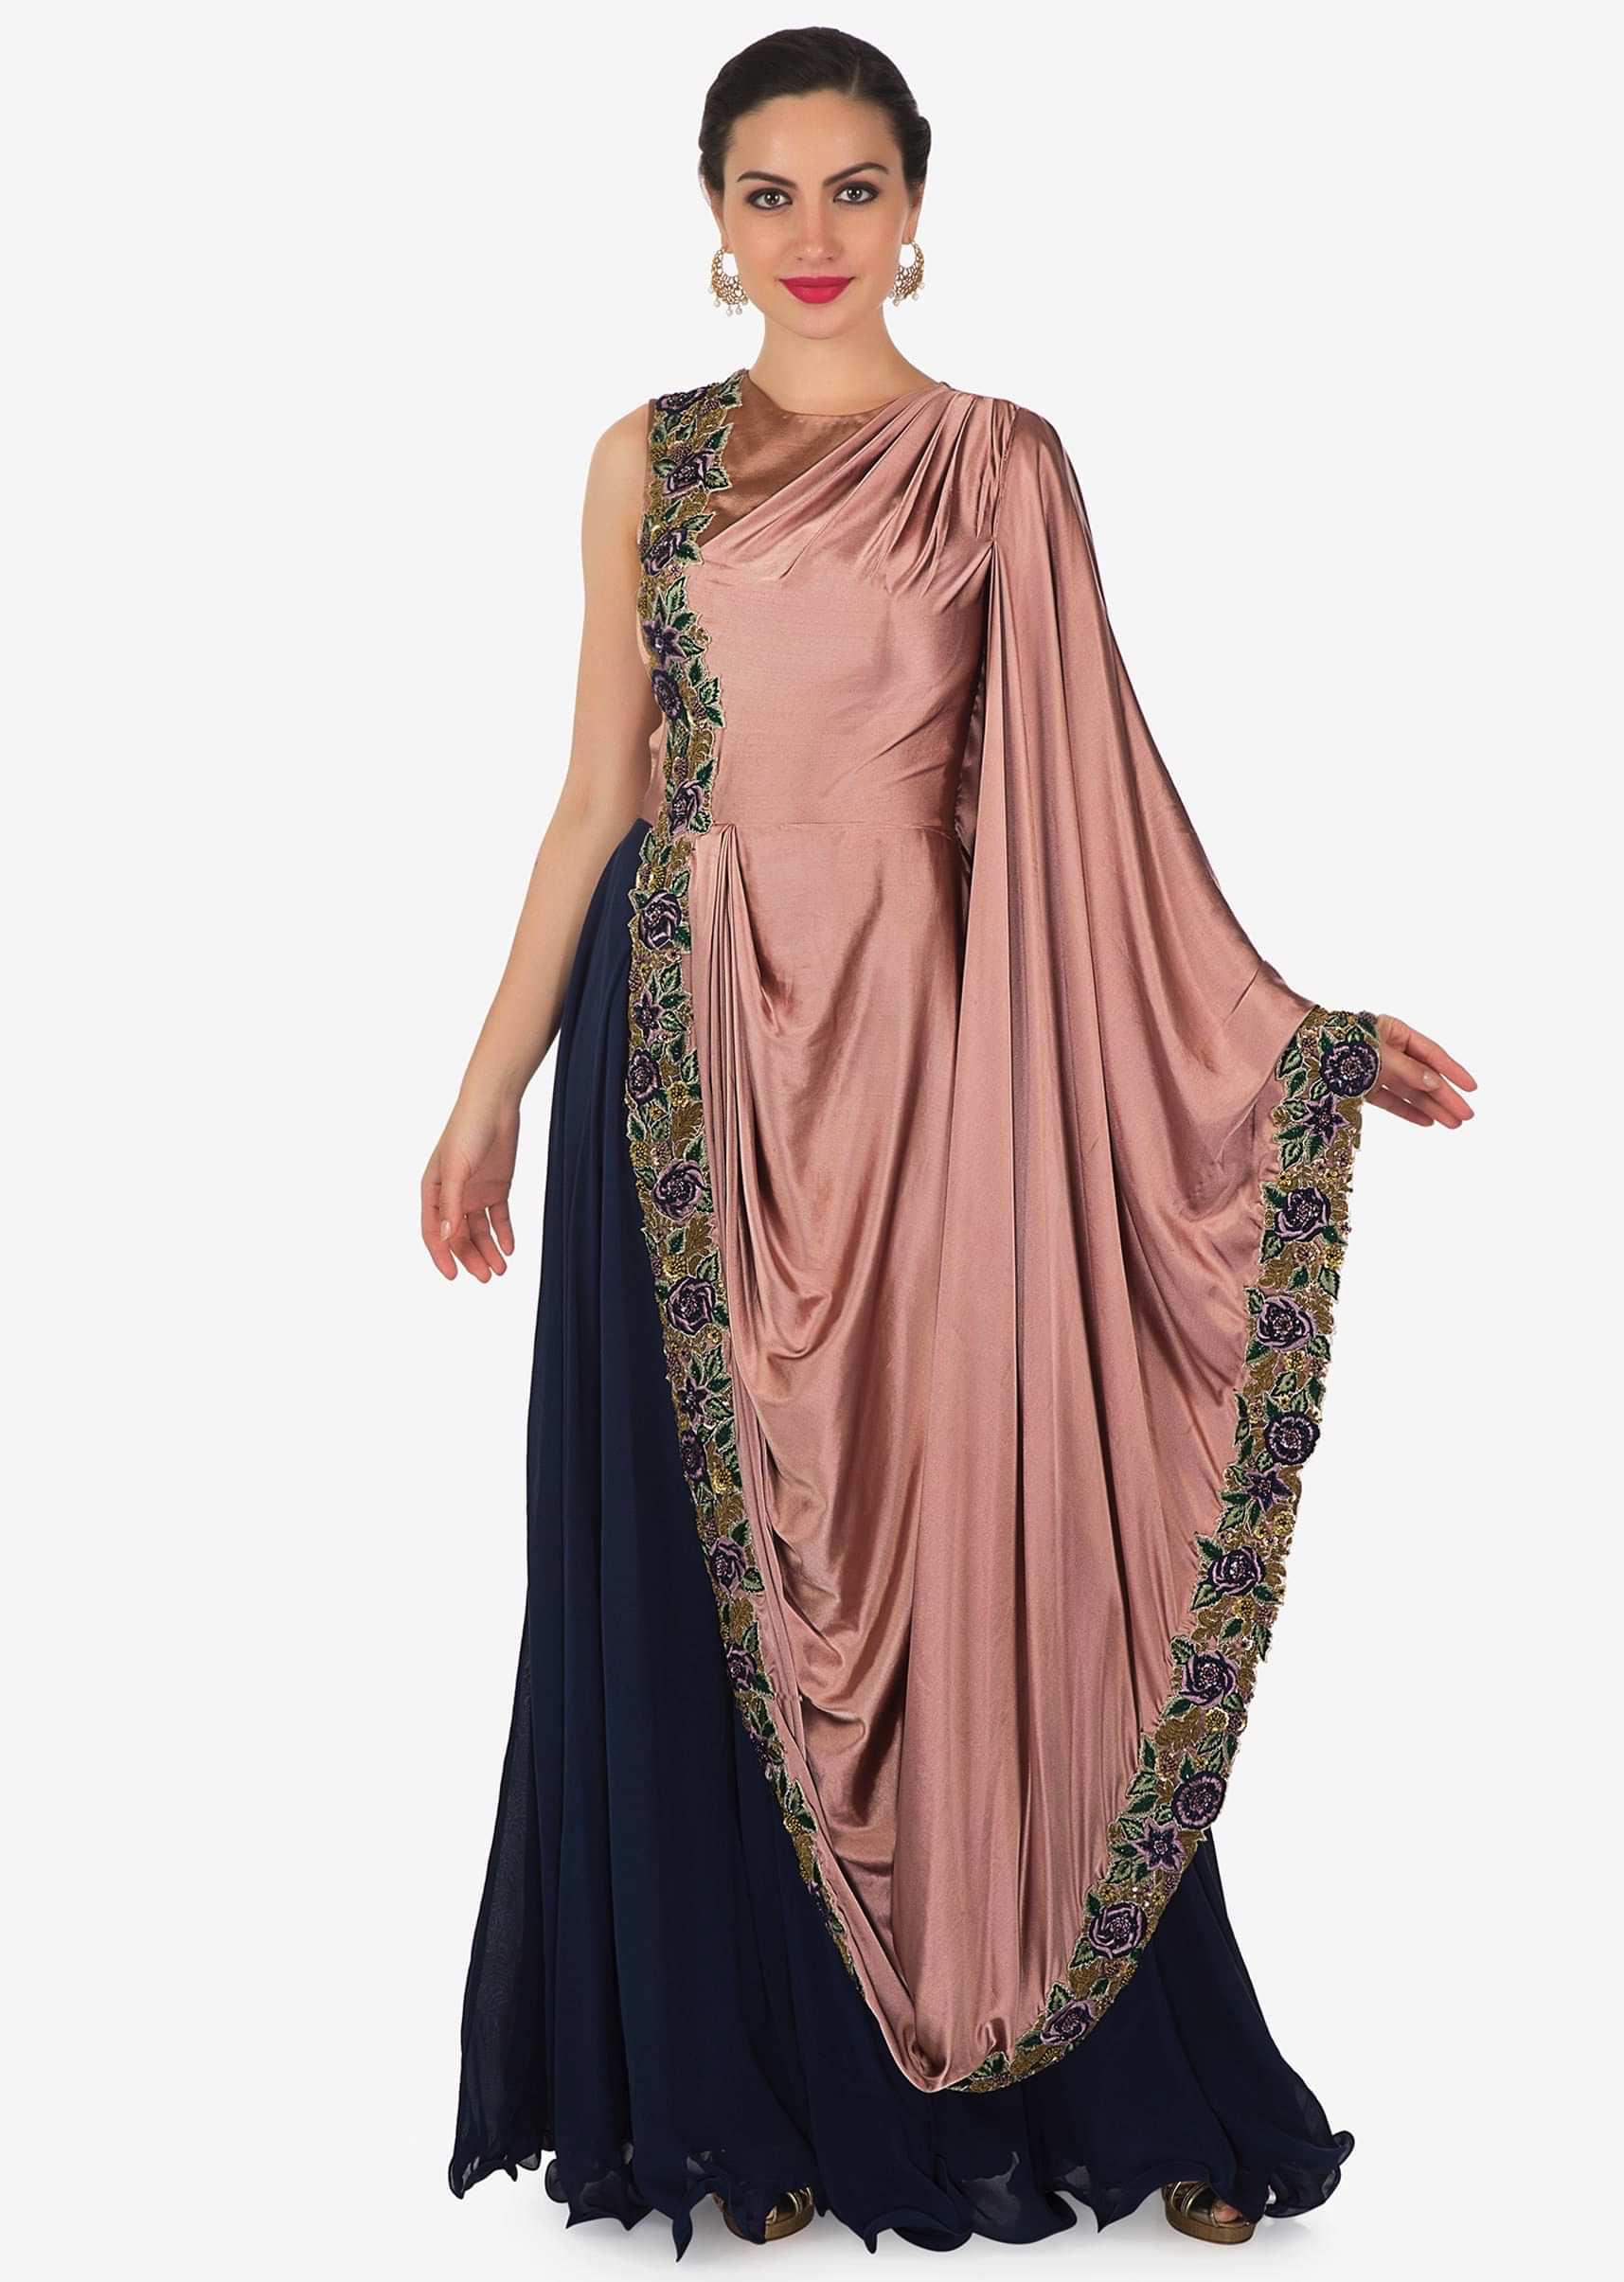 Navy Blue Mauve Satin and Chiffon Gown Featuring Resham Handwork Only on Kalki